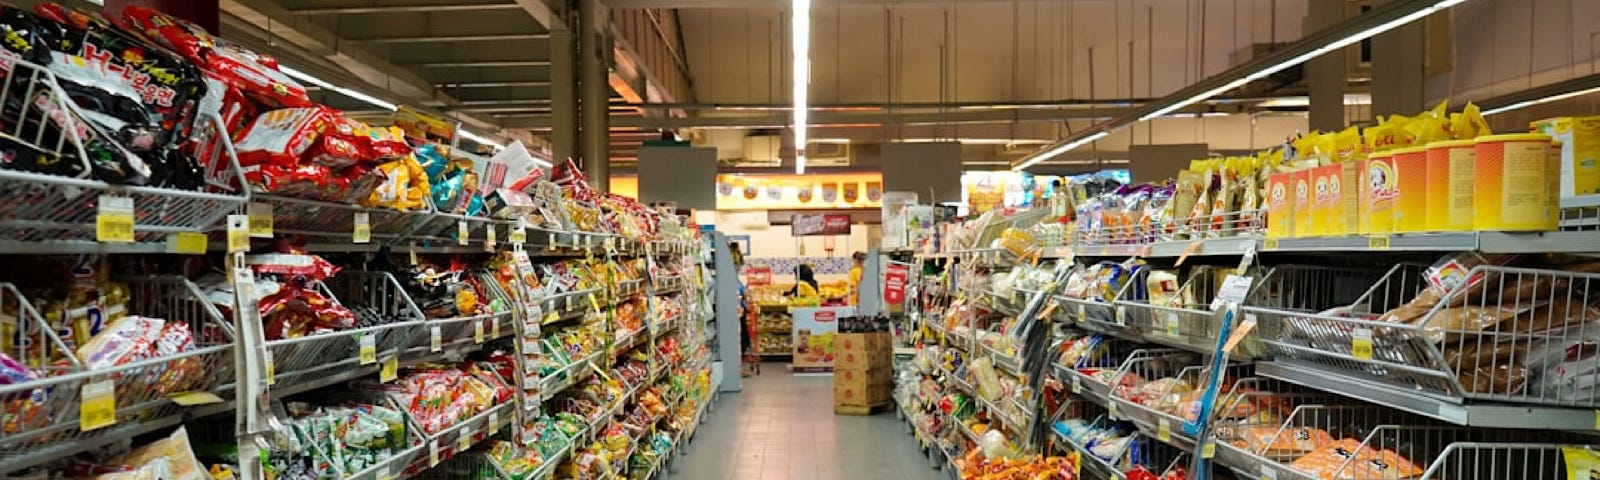 Fikri  Rasyyid took this photo of a food aisle at a supermarket.